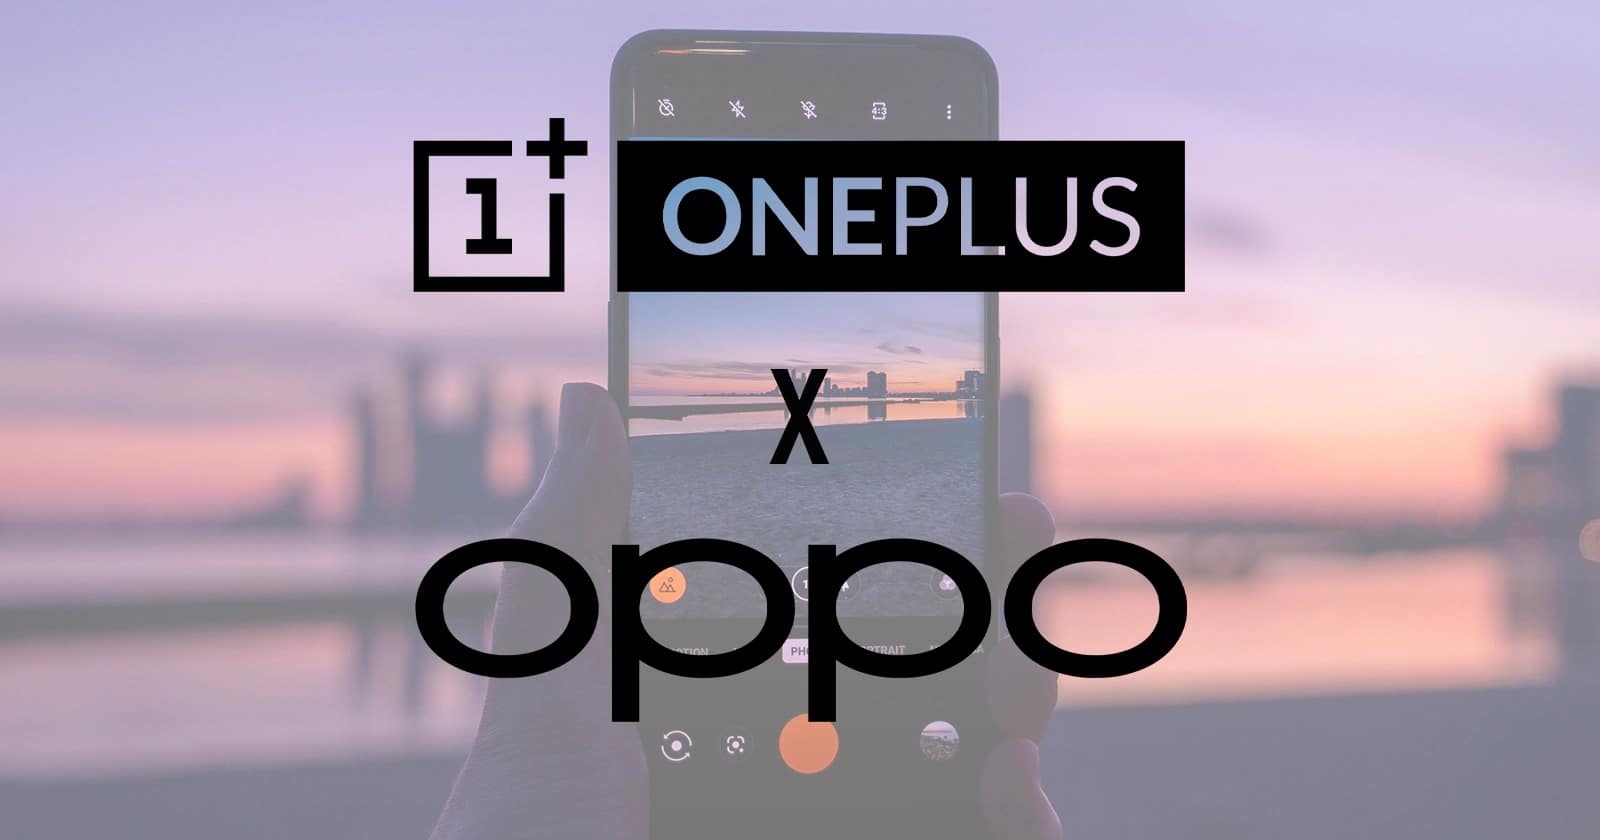 Oneplus Is Officially Merging With Oppo